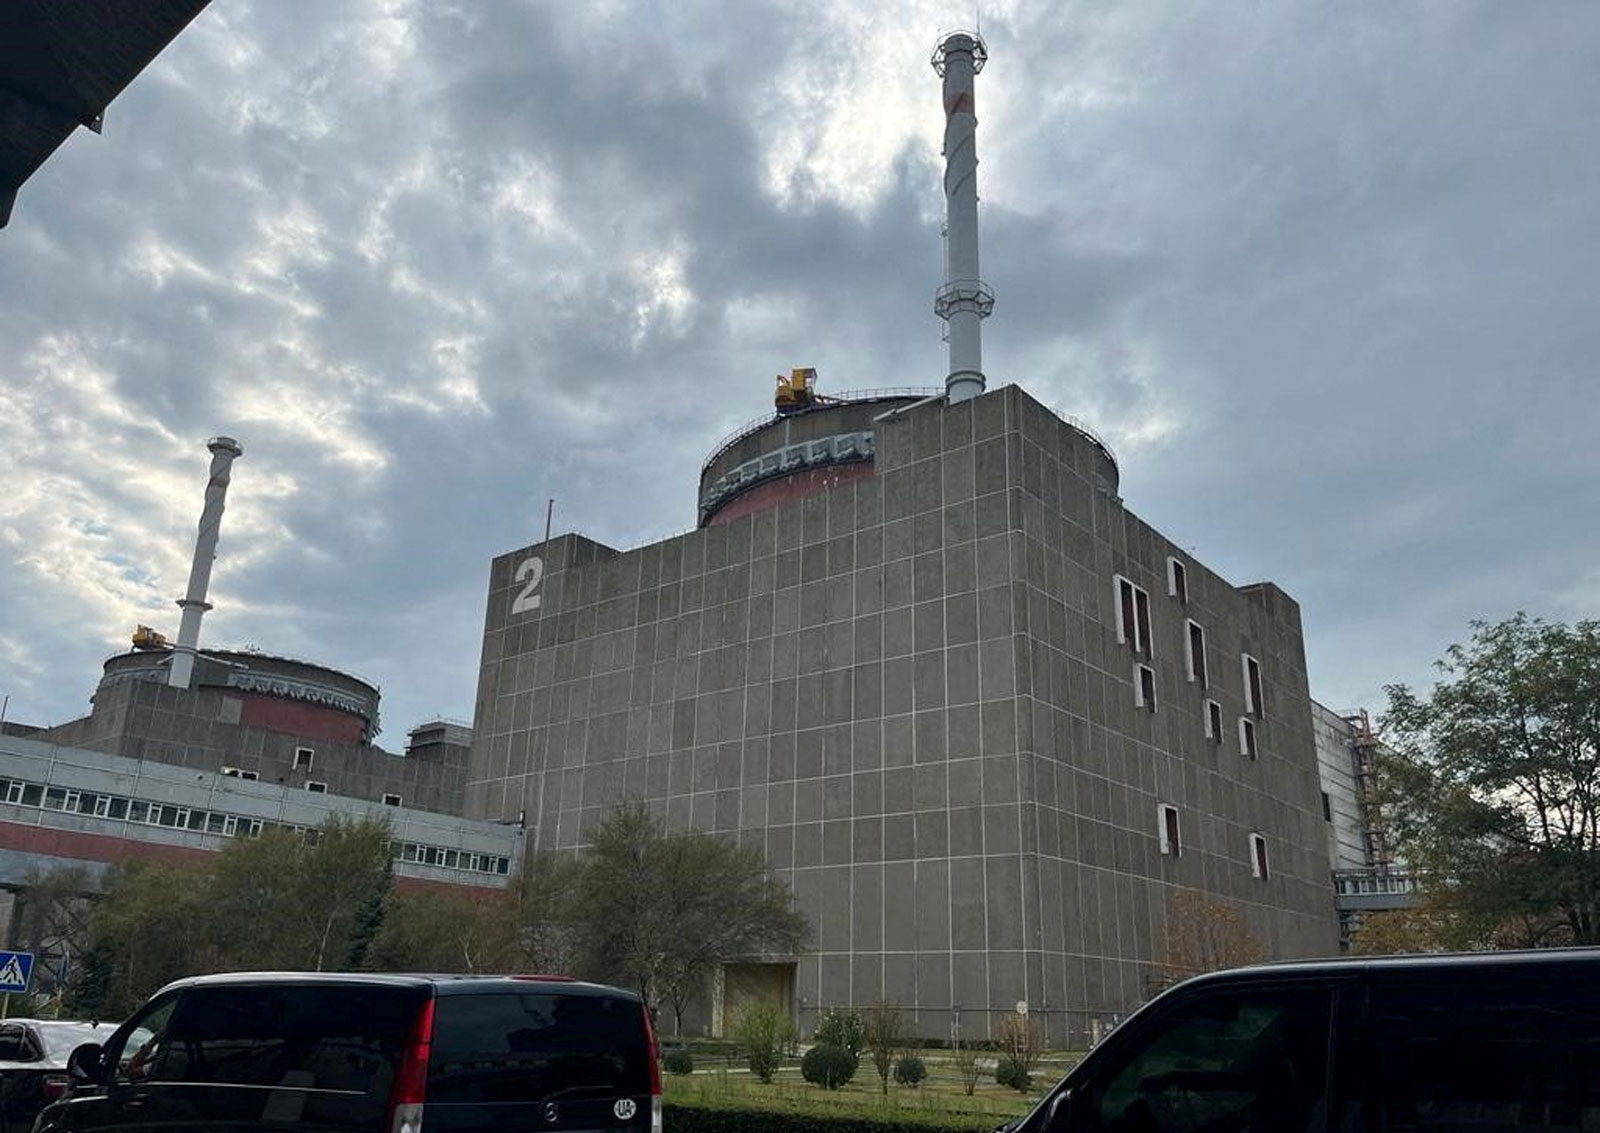 The Zaporizhzhia Nuclear Power Plant during a visit by members of the International Atomic Energy Agency (IAEA) on Friday.